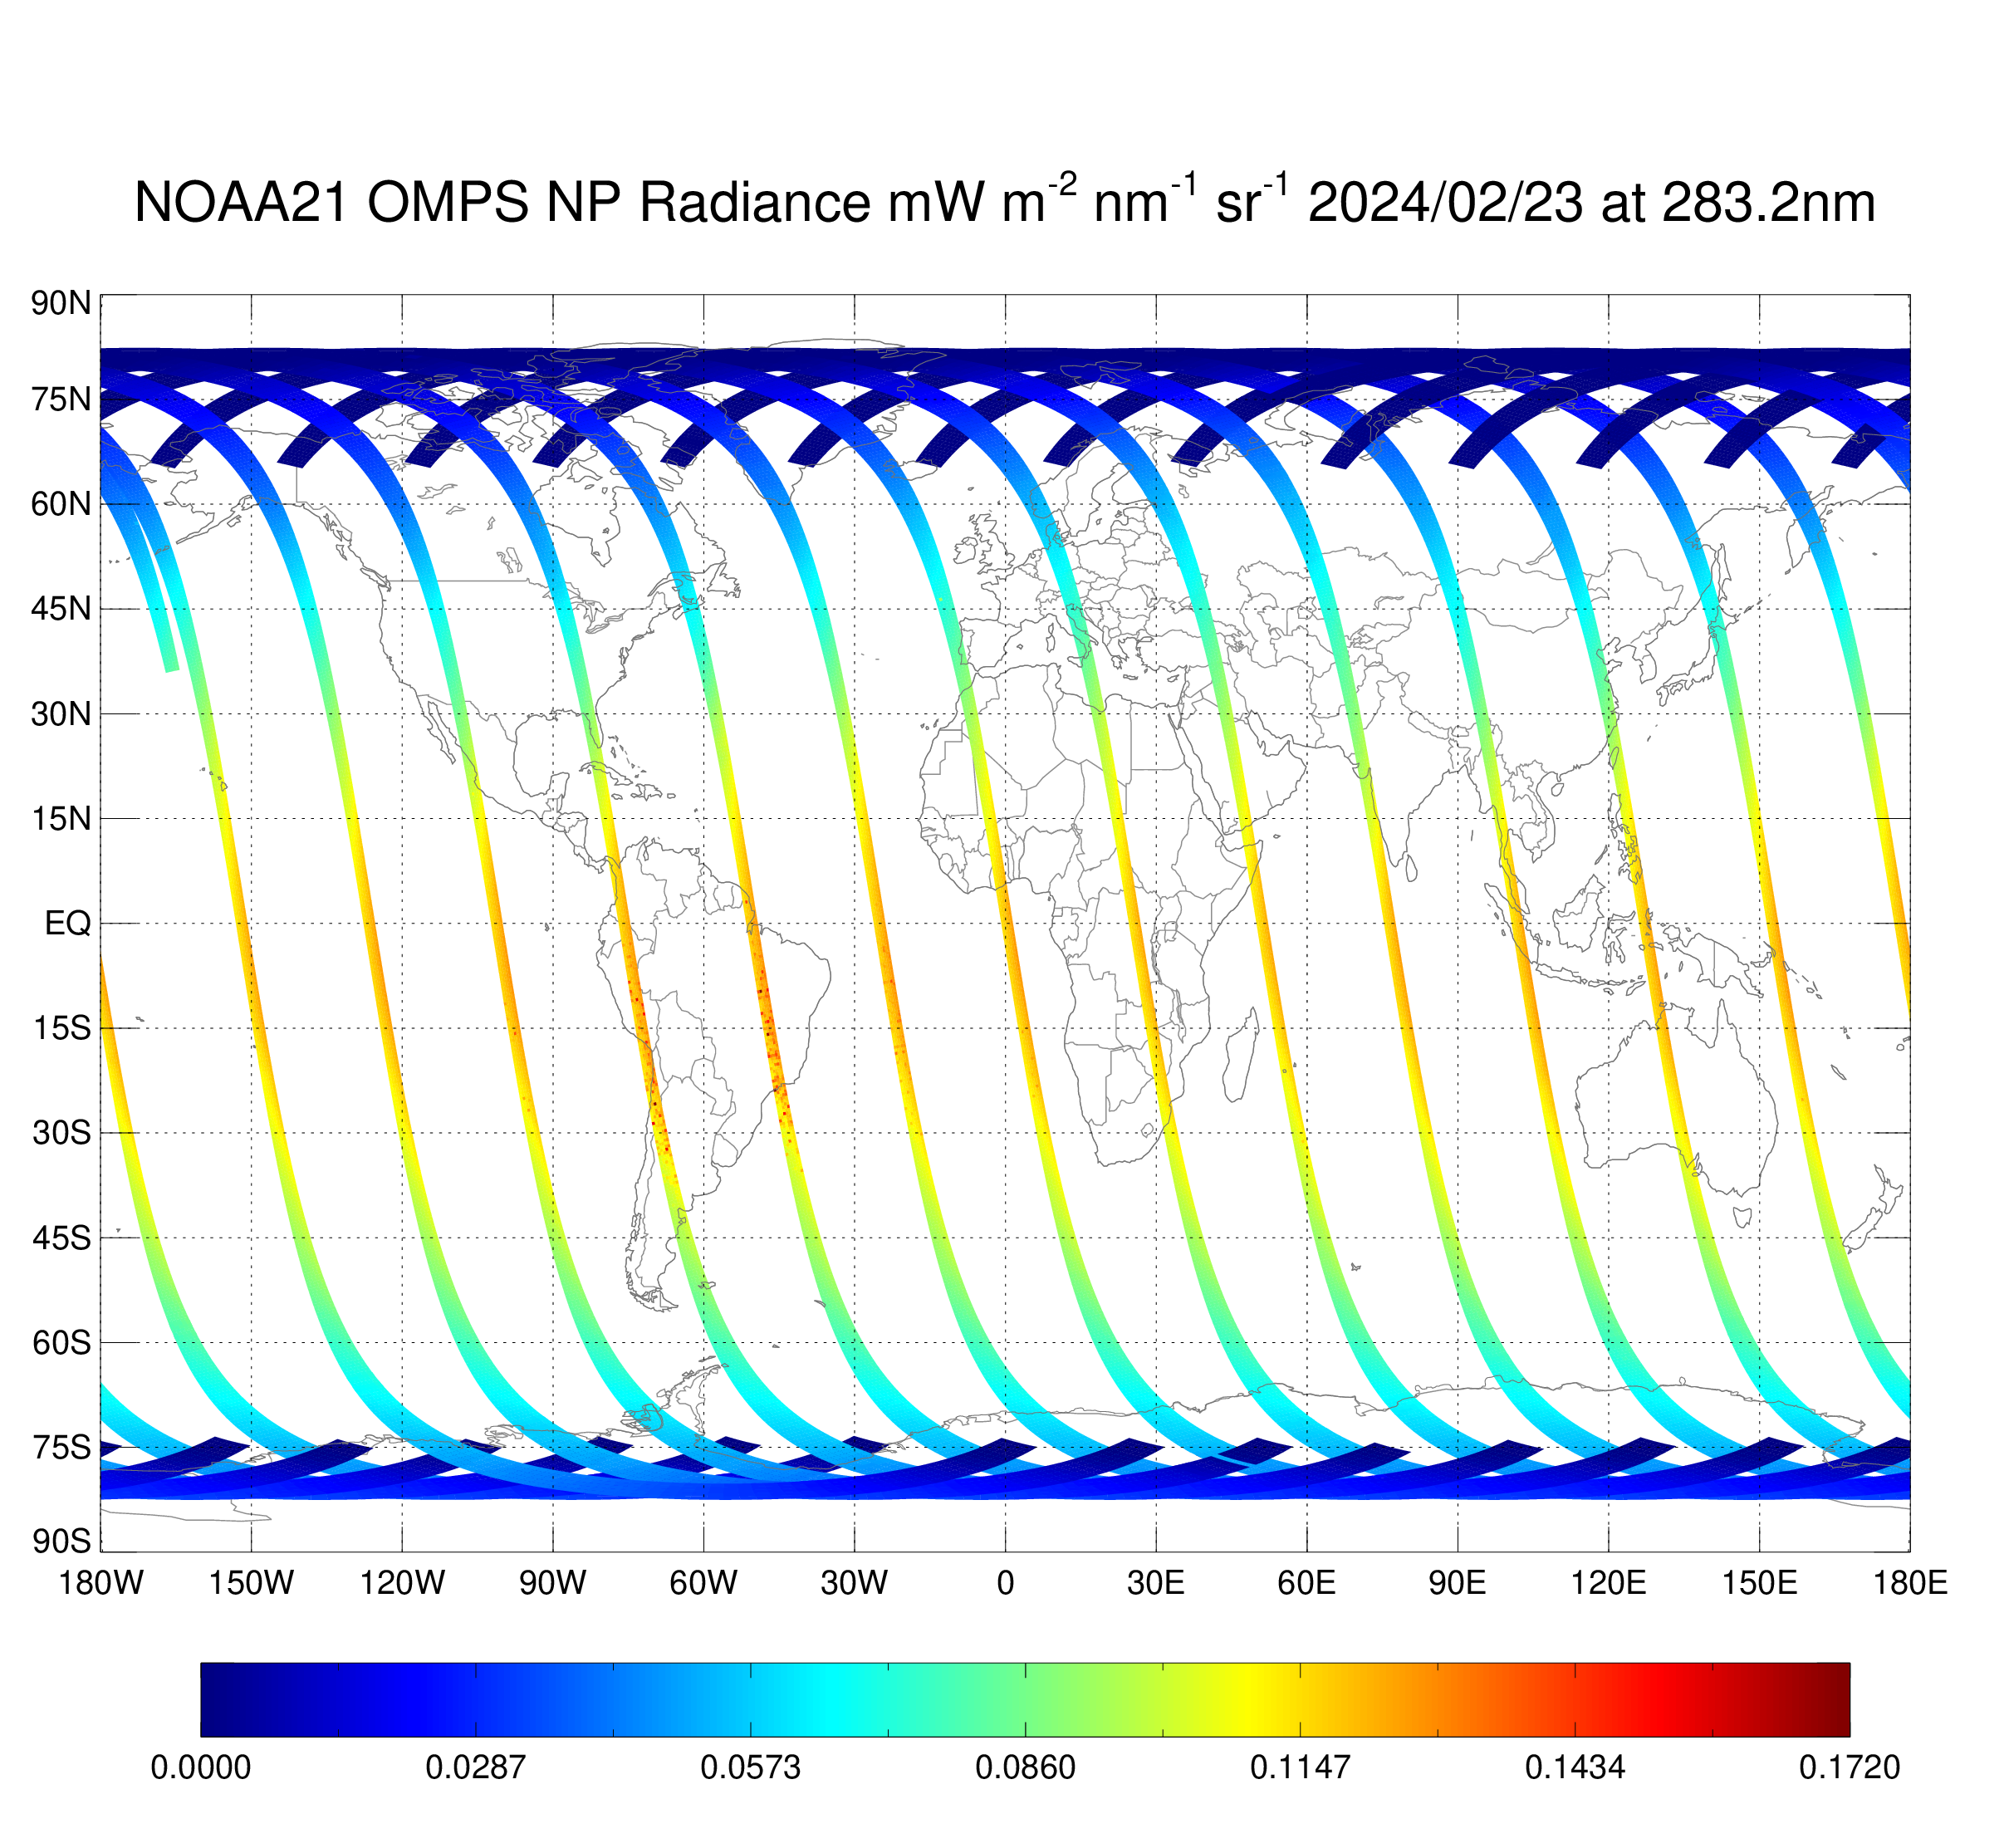 NOAA-21 OMPS Nadir Profiler  - NP Earth View Radiance - Radiance Map at 283.0 nm - 02/23/2024